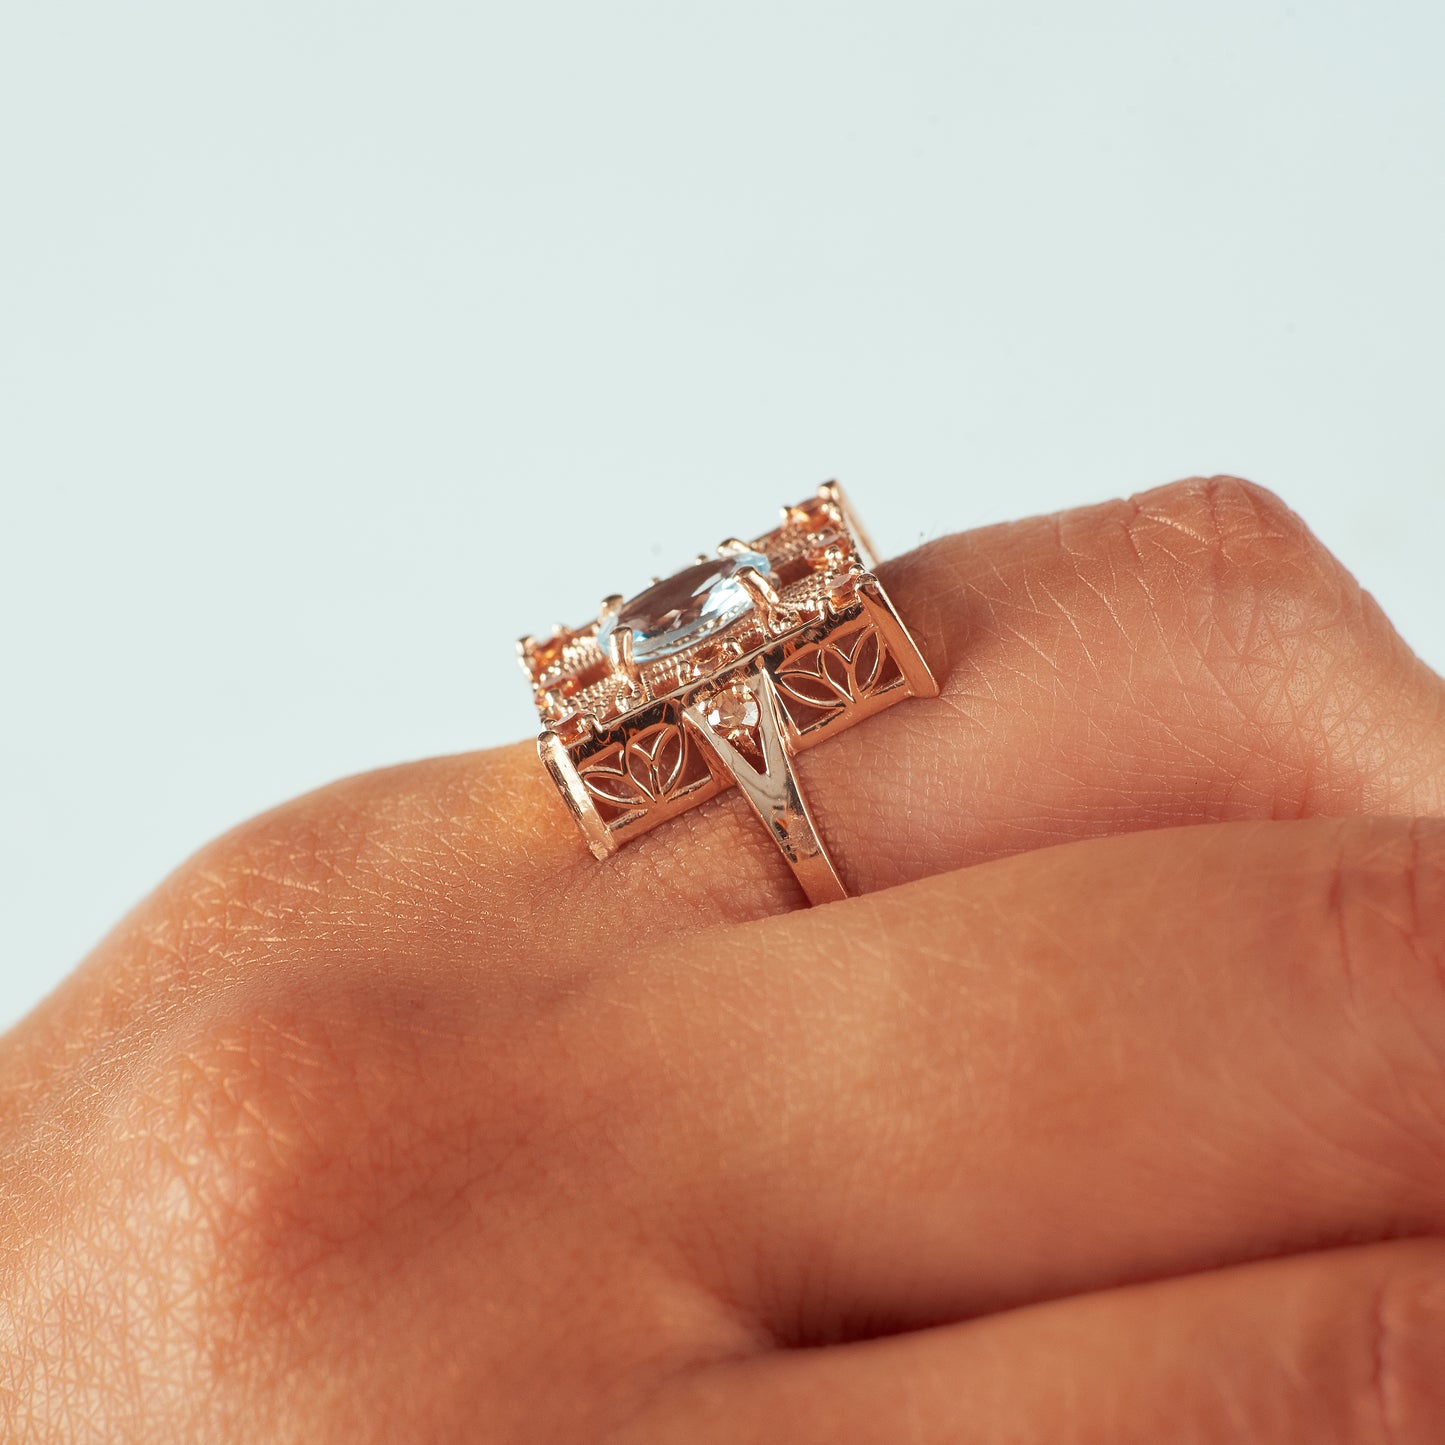 Side view of 14k rose gold aquamarine and champagne diamond ring on hand model.